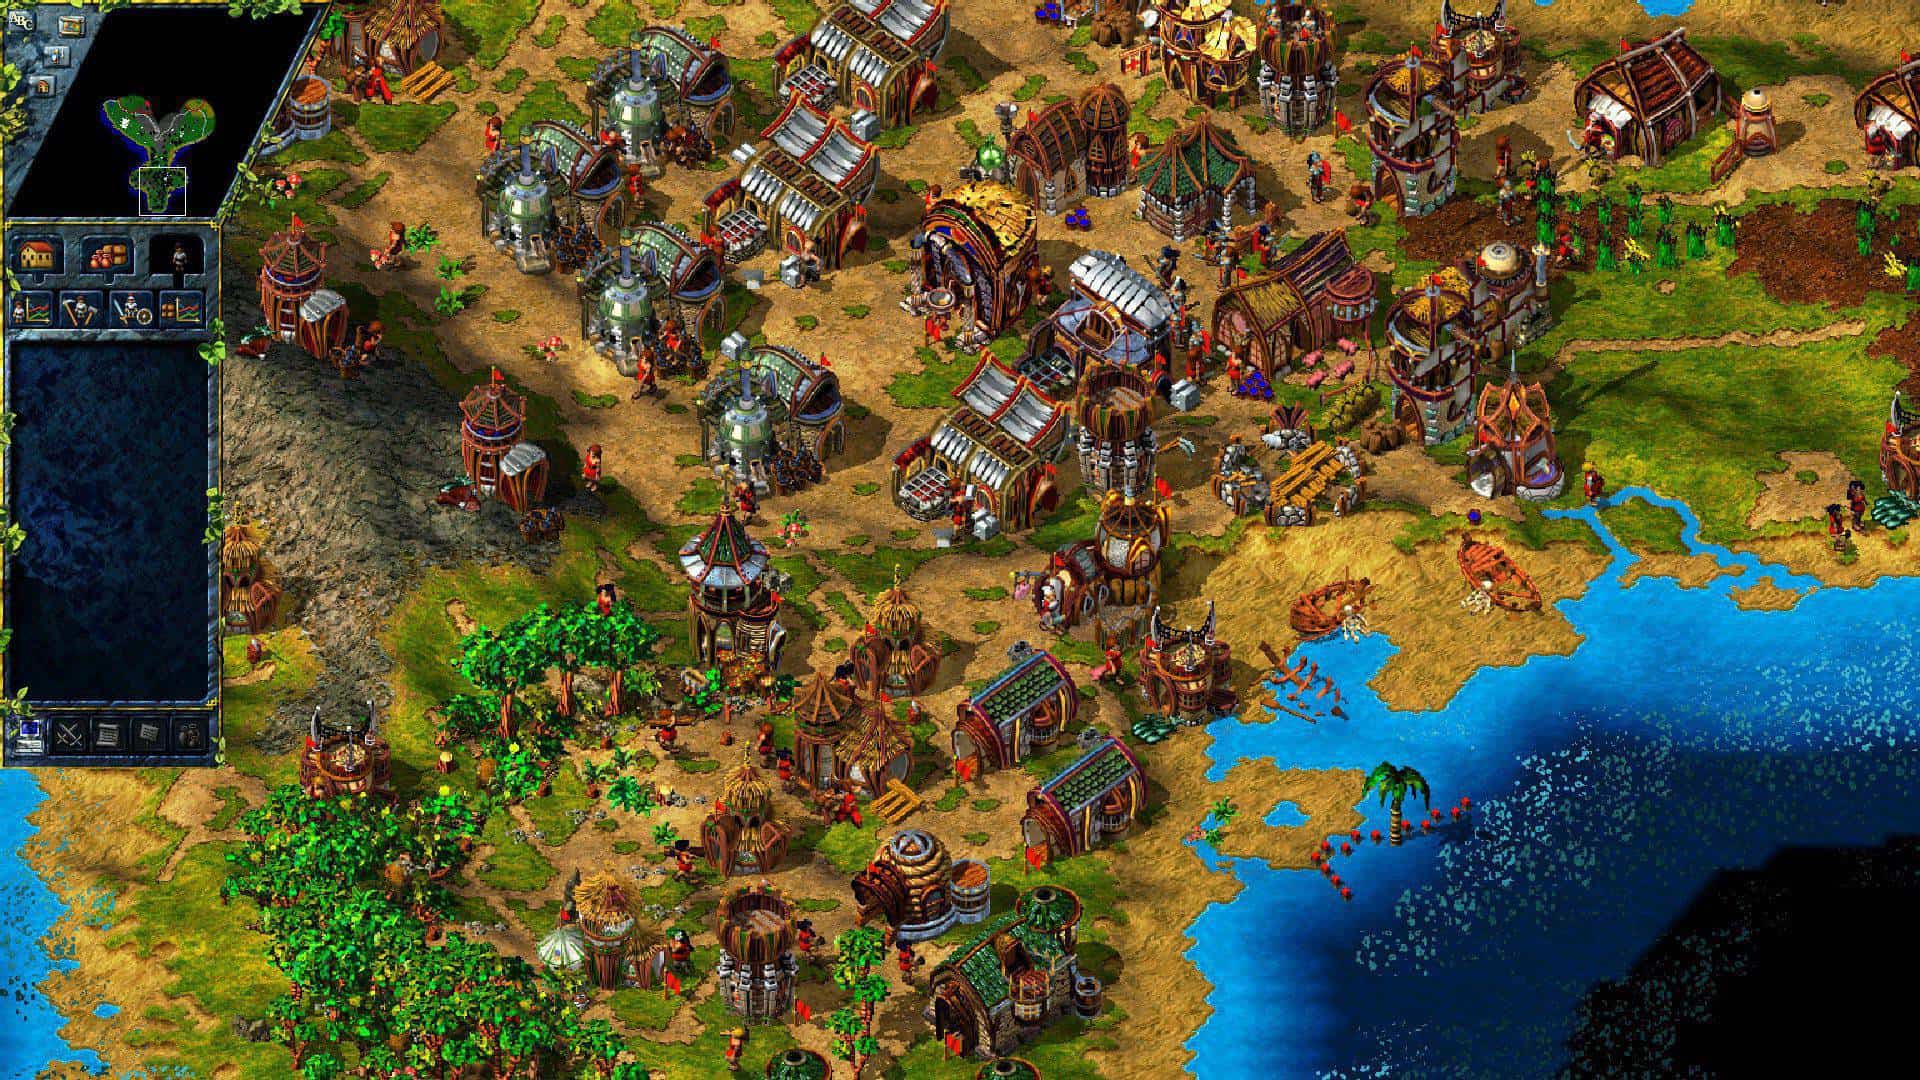 TheSettlers3 HE Screenshot 1 181115 4pm CET 1542216901